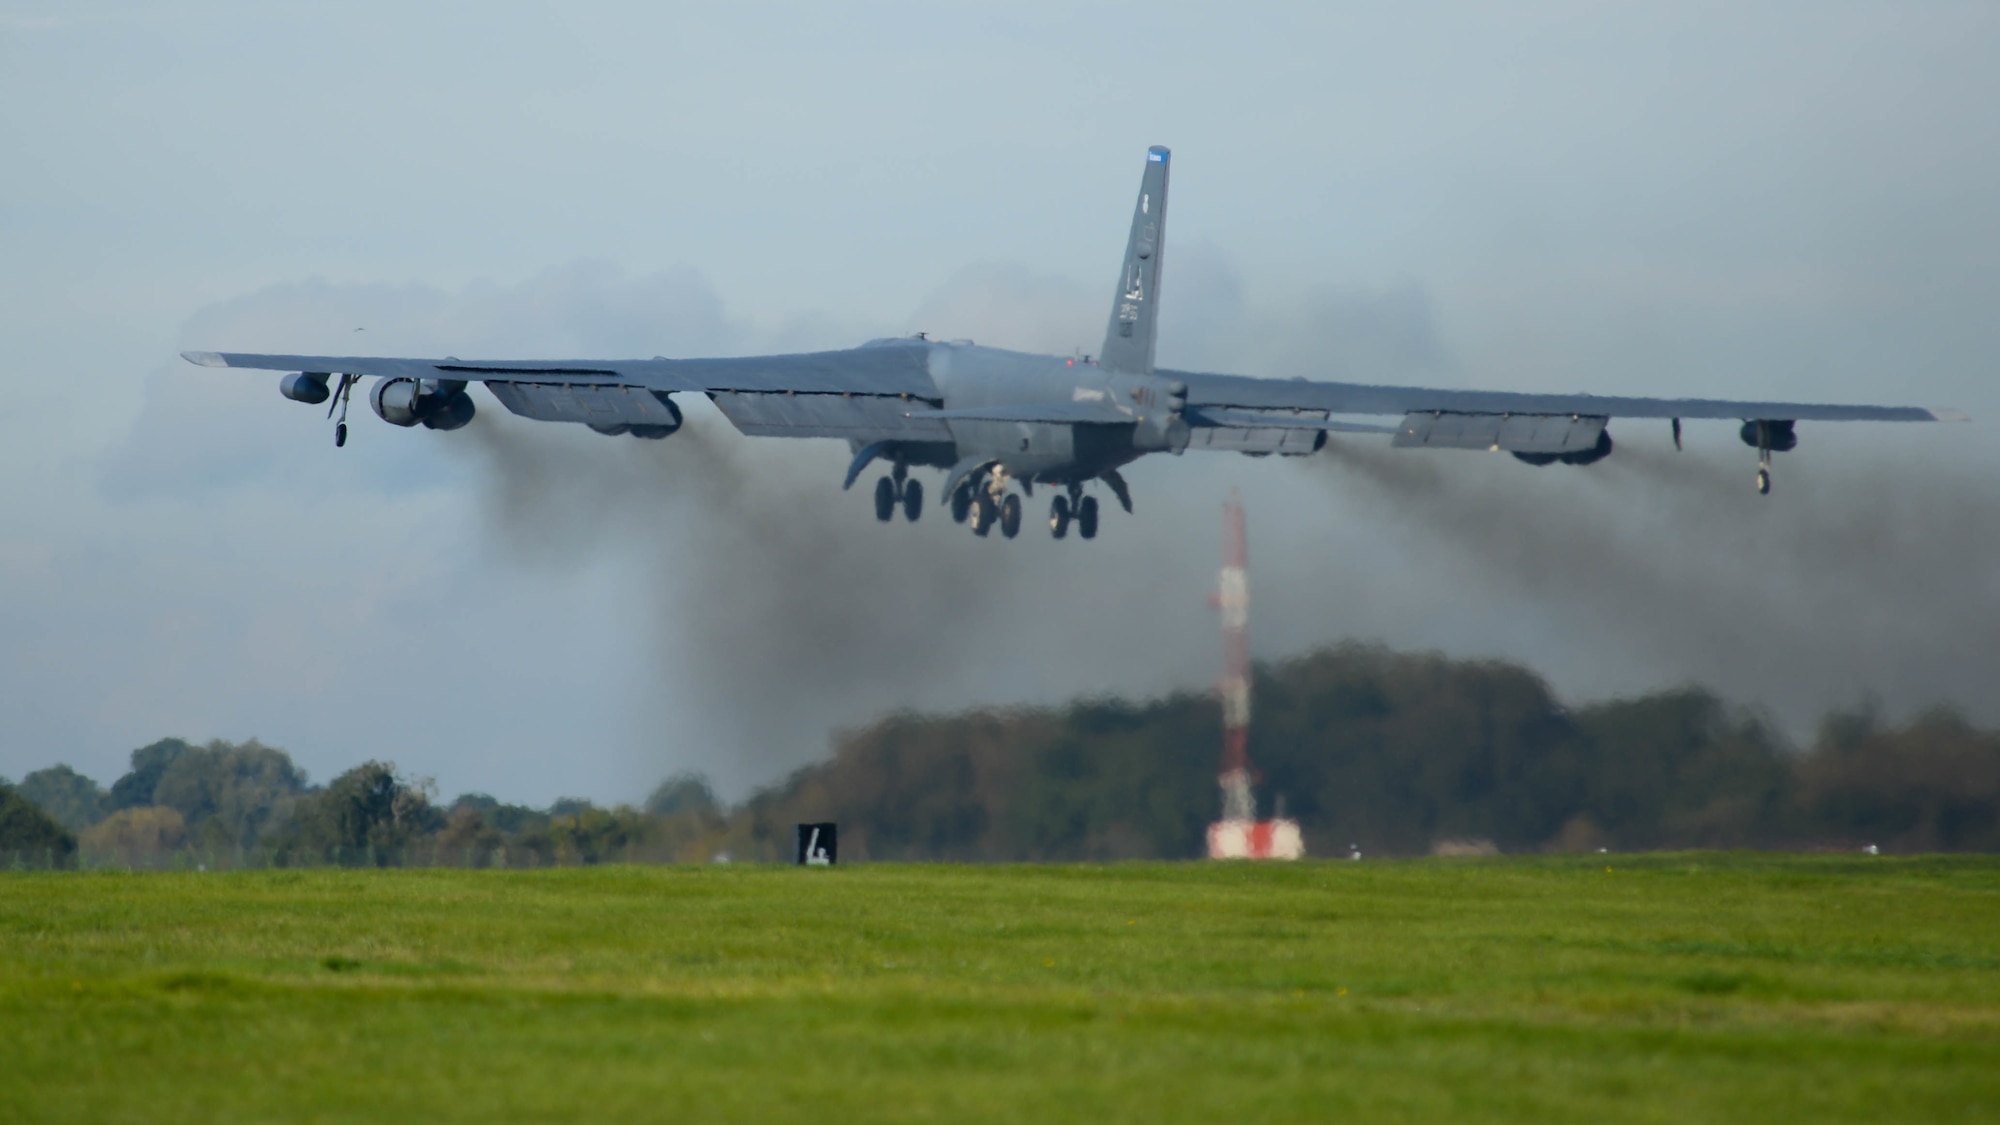 A B-52 Stratofortress takes off the runway at Fairford Royal Air Force Base, Sept. 22, 2017.